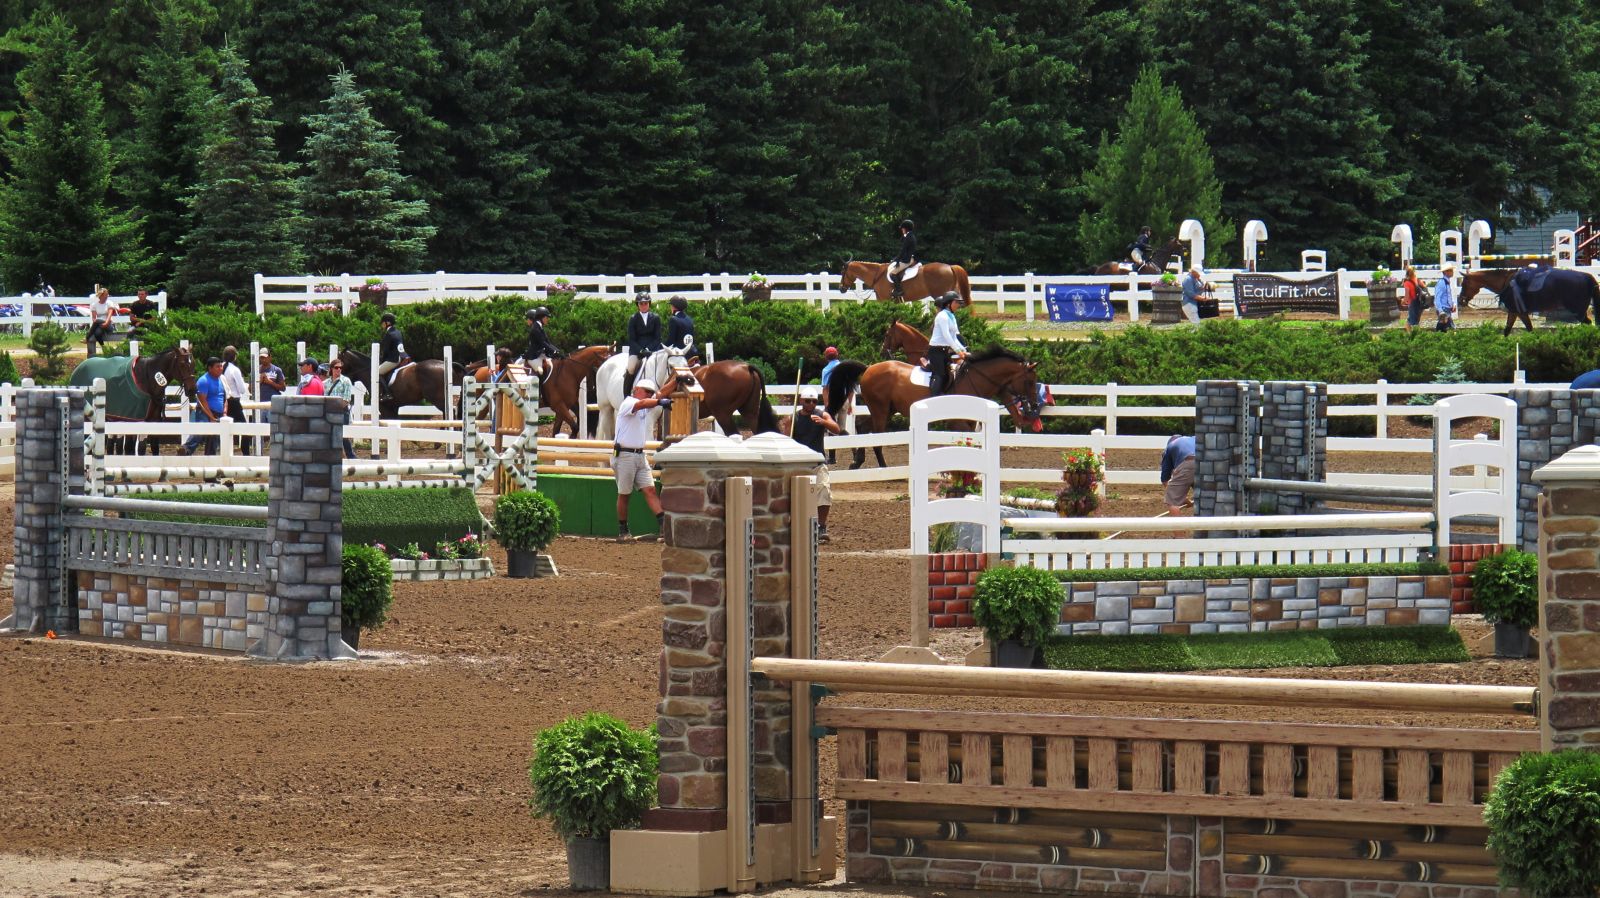 The best in show jumping descend on Lake Placid at the end of June for two full weeks